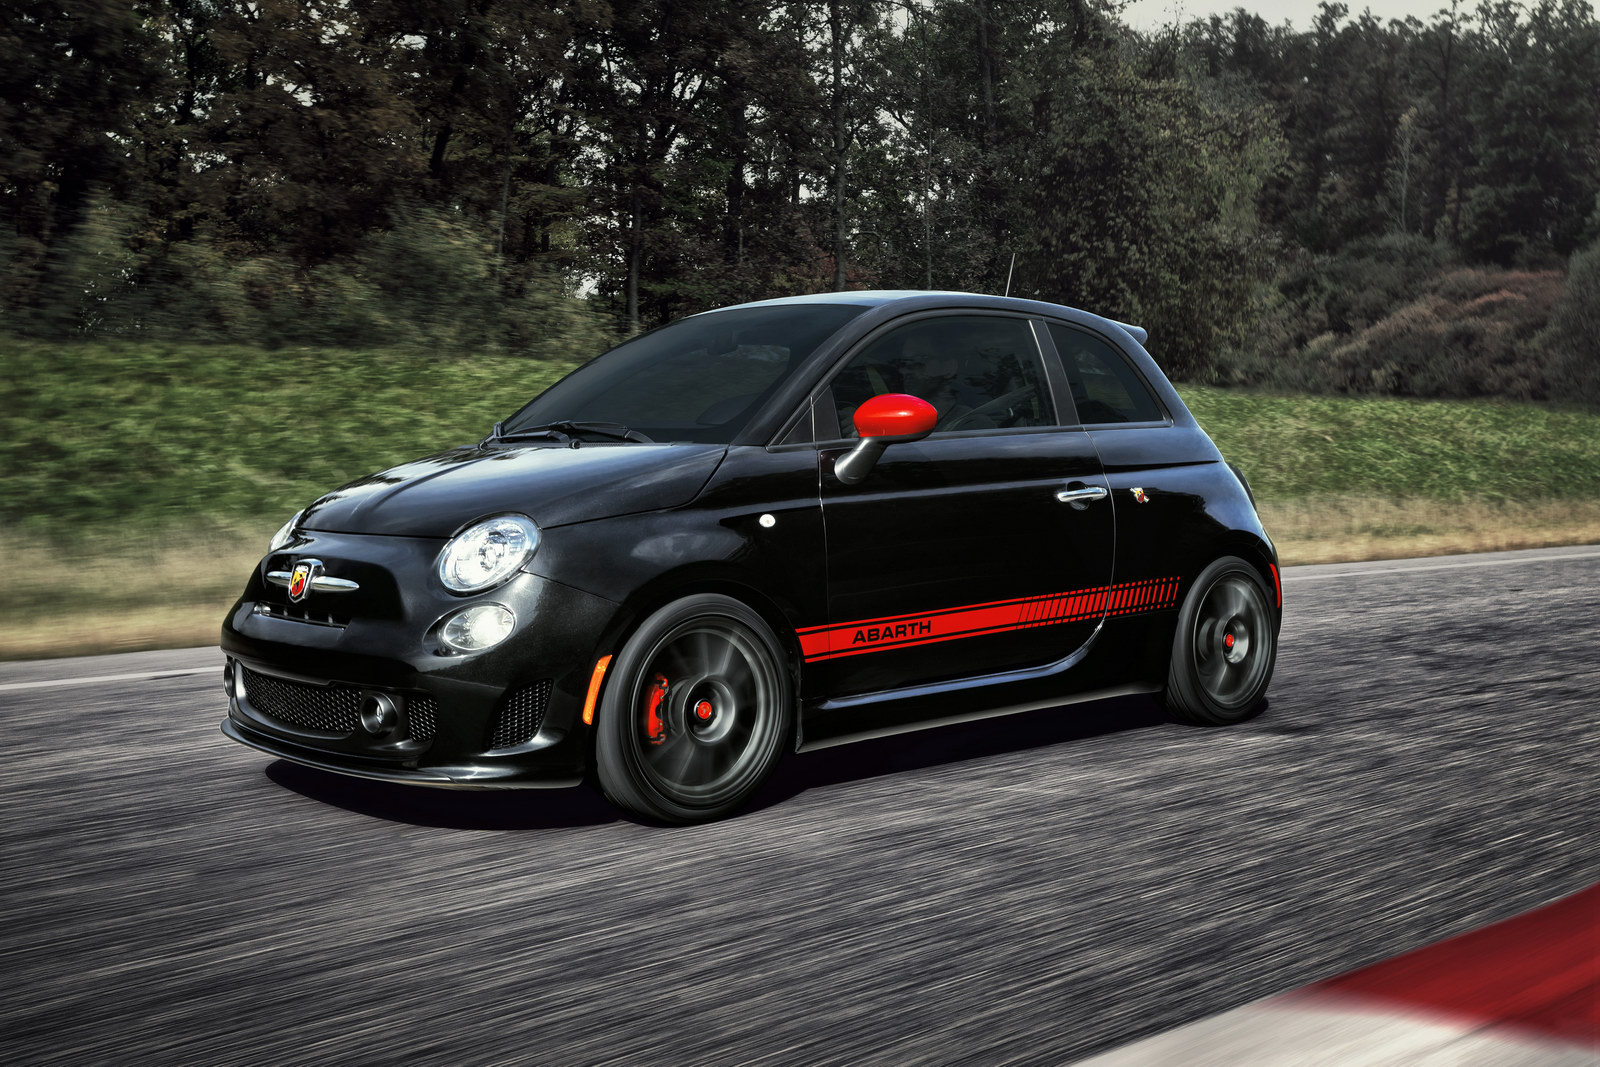 New 12 Fiat 500 Abarth Hits U S Shores With 160hp 1 4l Turbo Engine 36 Photos Carscoops